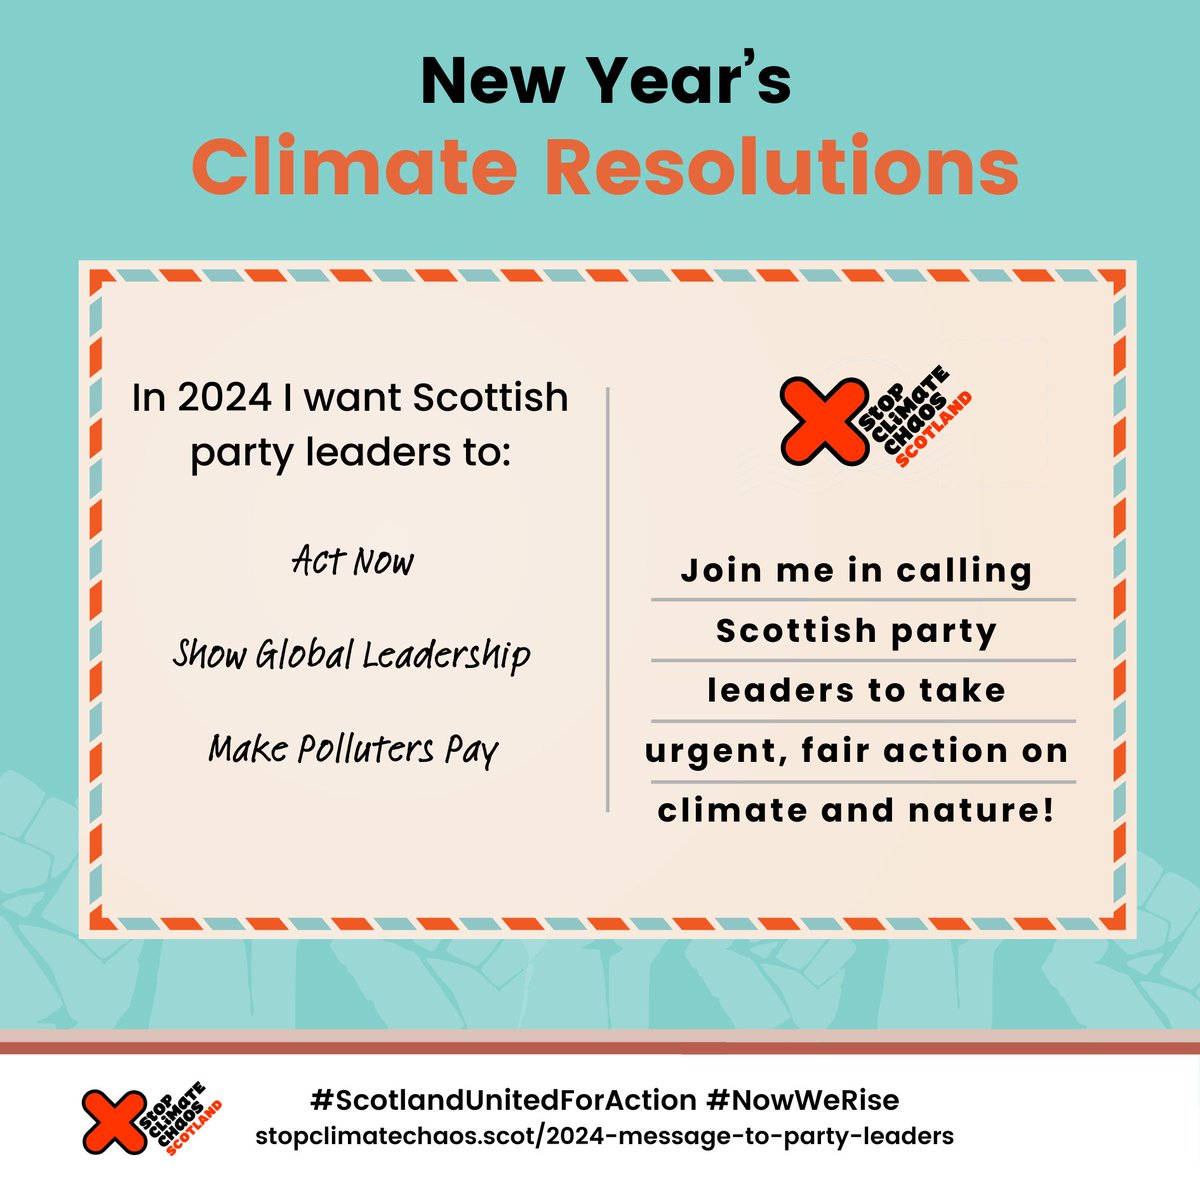 Join @sccscot in making sure that Scotland’s political party leaders hear loud and clear that we care about the climate and nature emergencies. We've taken action & sent a 2024 climate resolution to them - will you?👉 bit.ly/41RleVn #ScotlandUnitedForAction #Fairtrade